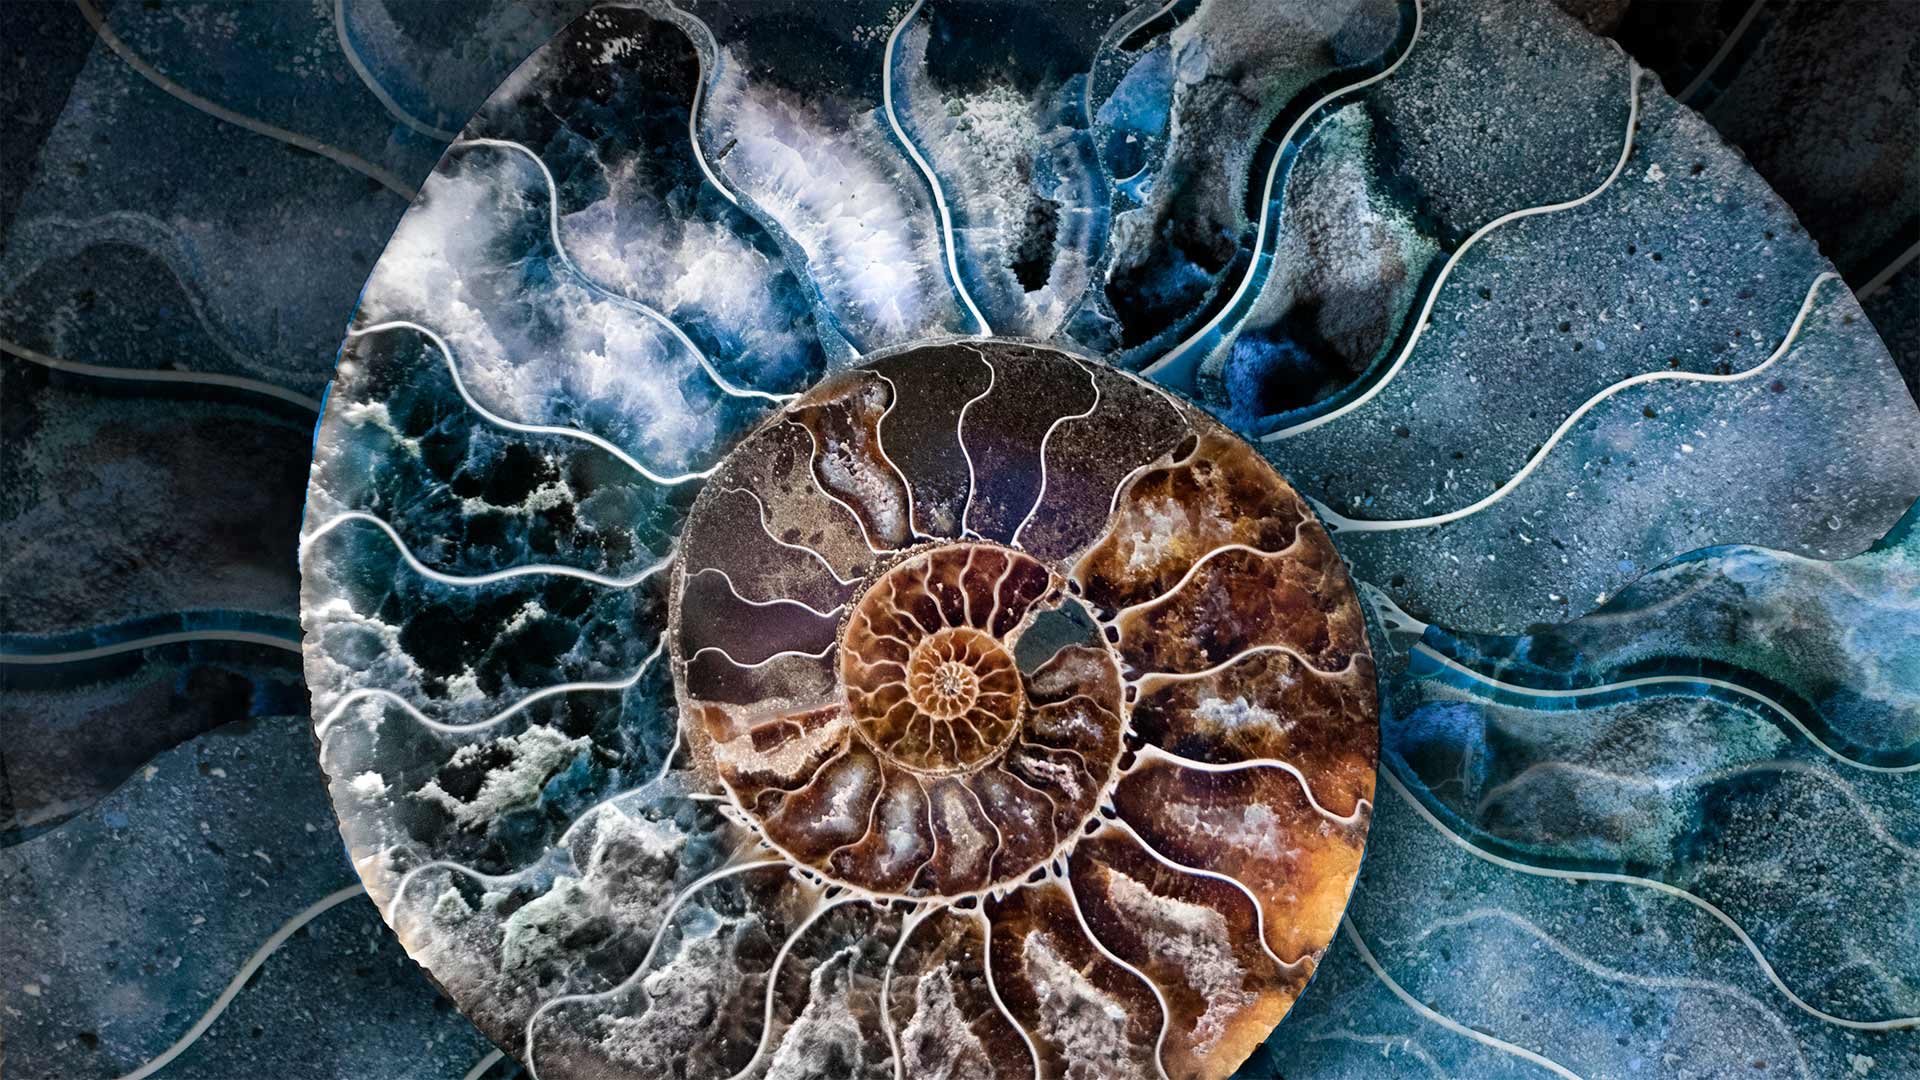 Cross-section of a fossilized ammonite shell - Marianna Armata/Getty Images)